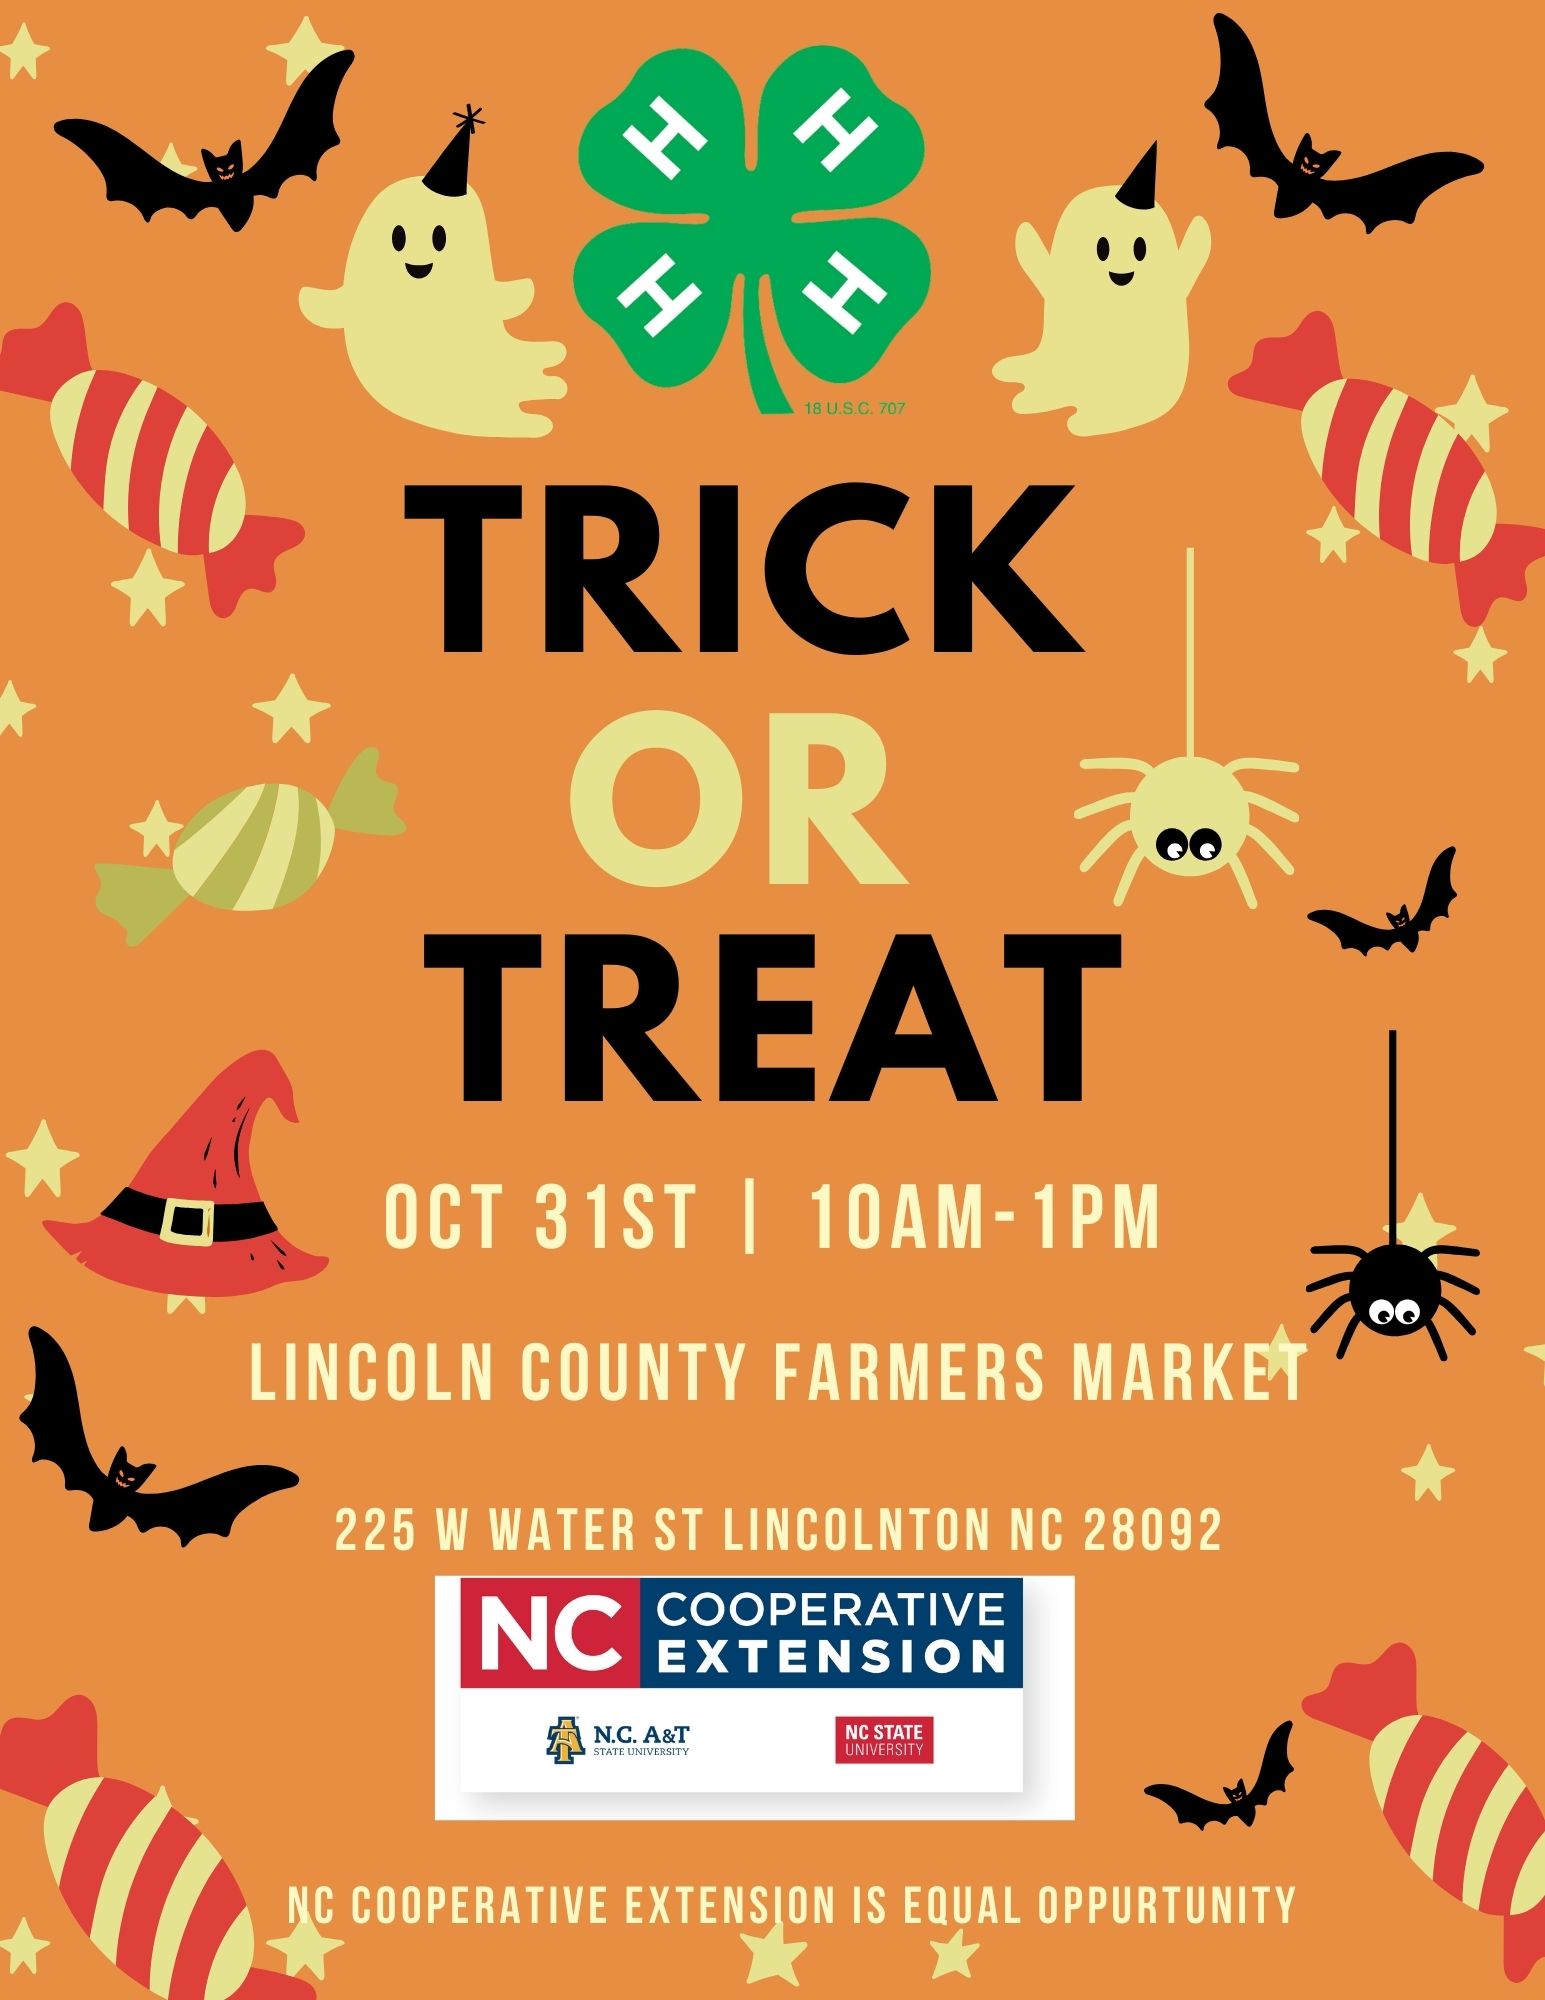 Trick or Treat event flyer